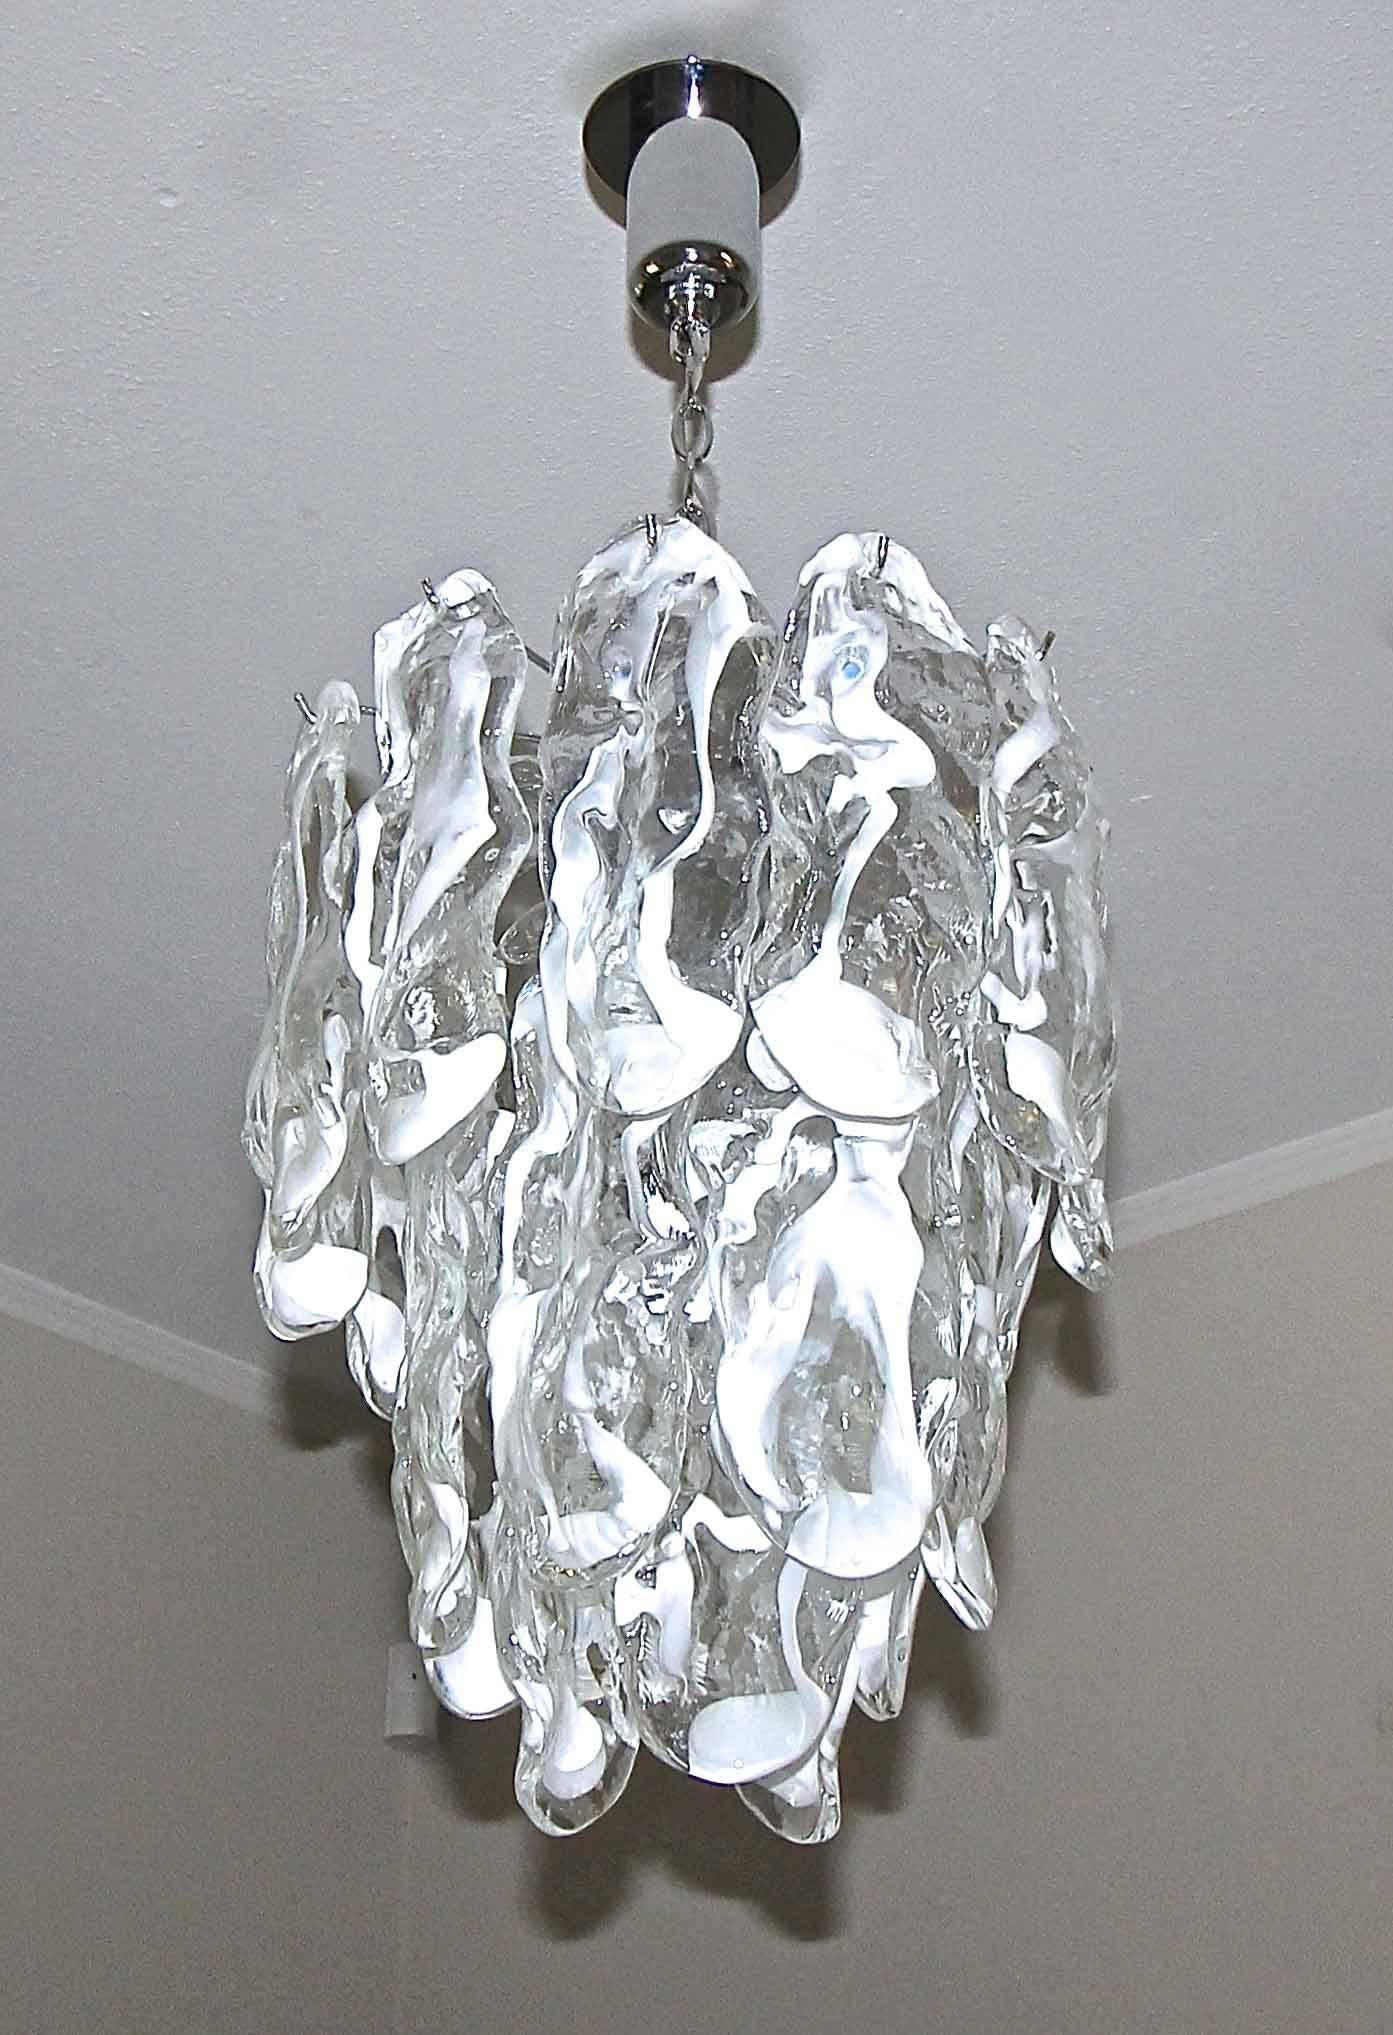 Murano glass chandelier by Mazzega with handblown clear and white undulating glass panels. Newly chrome-plated frame with five candelabra "B" base bulbs, newly wired for US. A later 4.5" diameter chrome-plated backplate has been added